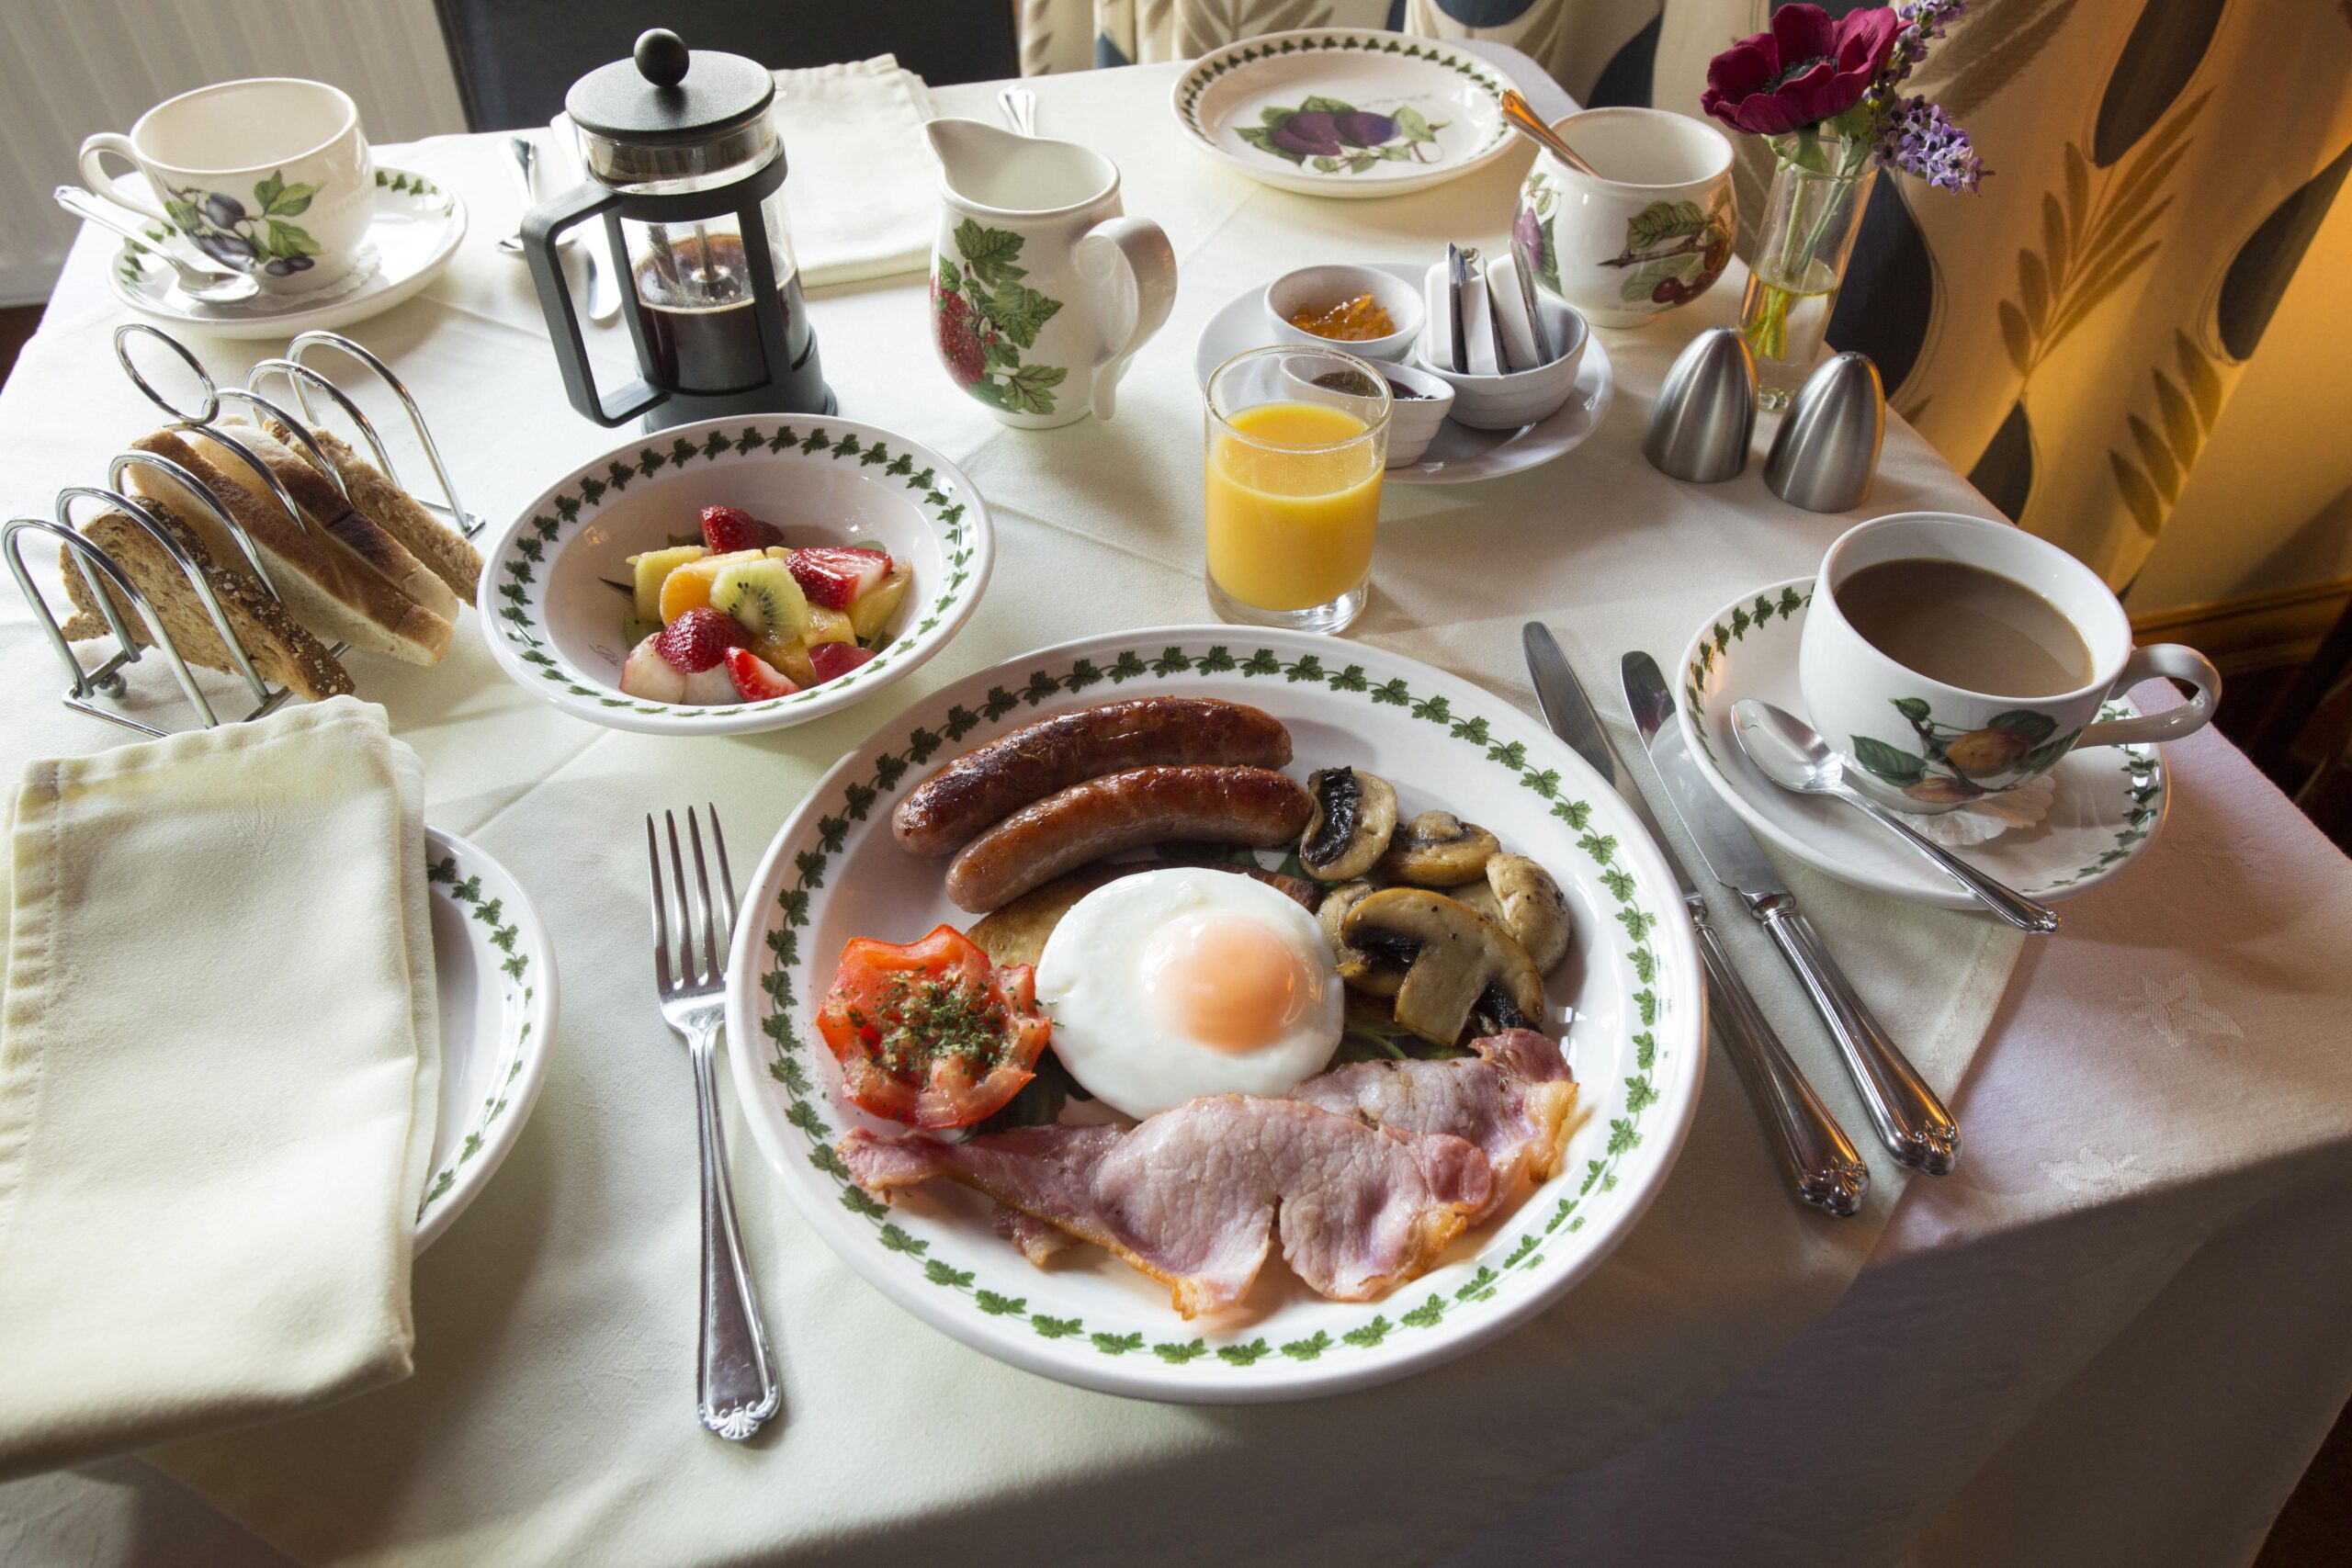 A Full Scottish Breakfast served at the Coila Guest House, Ayr, South Ayrshire (Photo Credit: Visit Scotland)